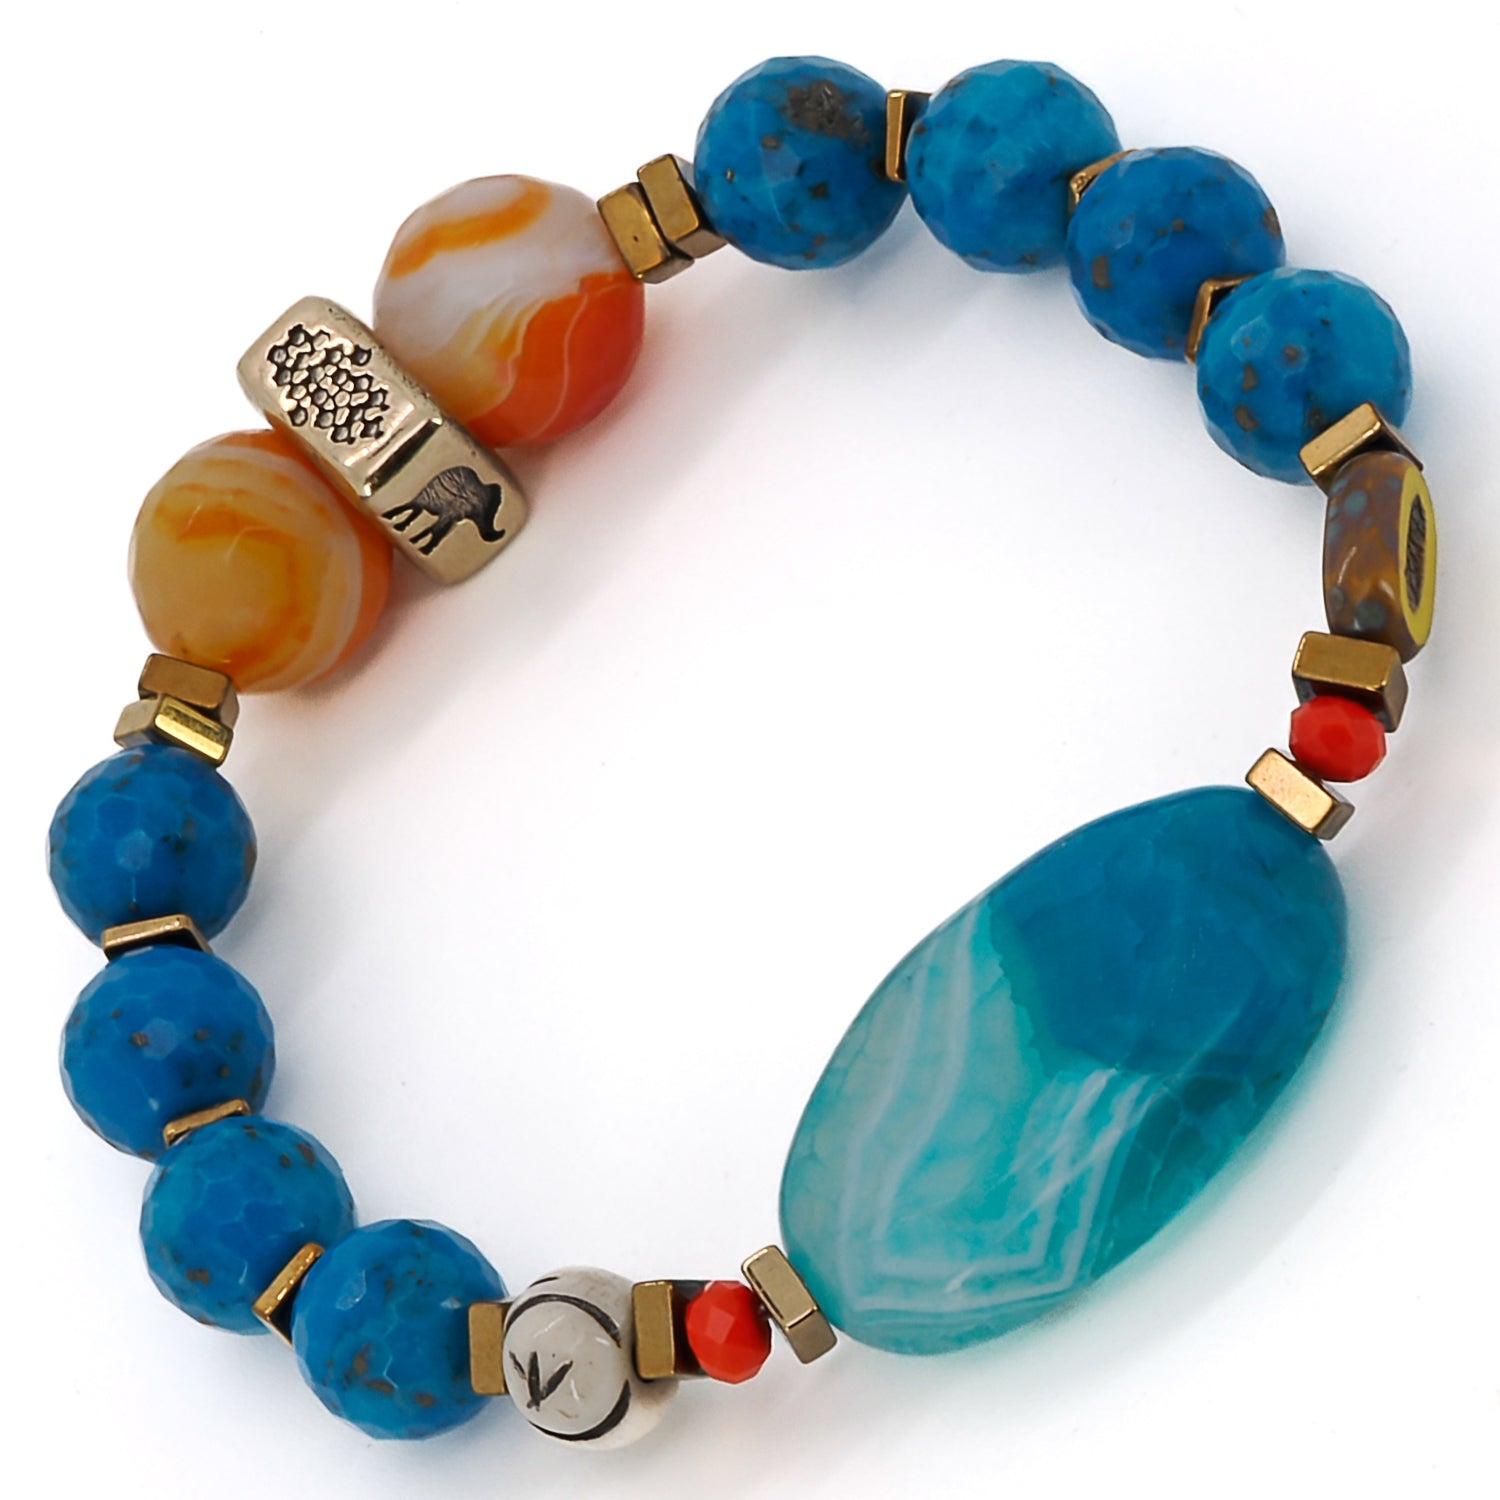 Embrace the energy of the Blue Agate Summer Vibe Bracelet, featuring blue agate, orange agate, and turquoise stones.